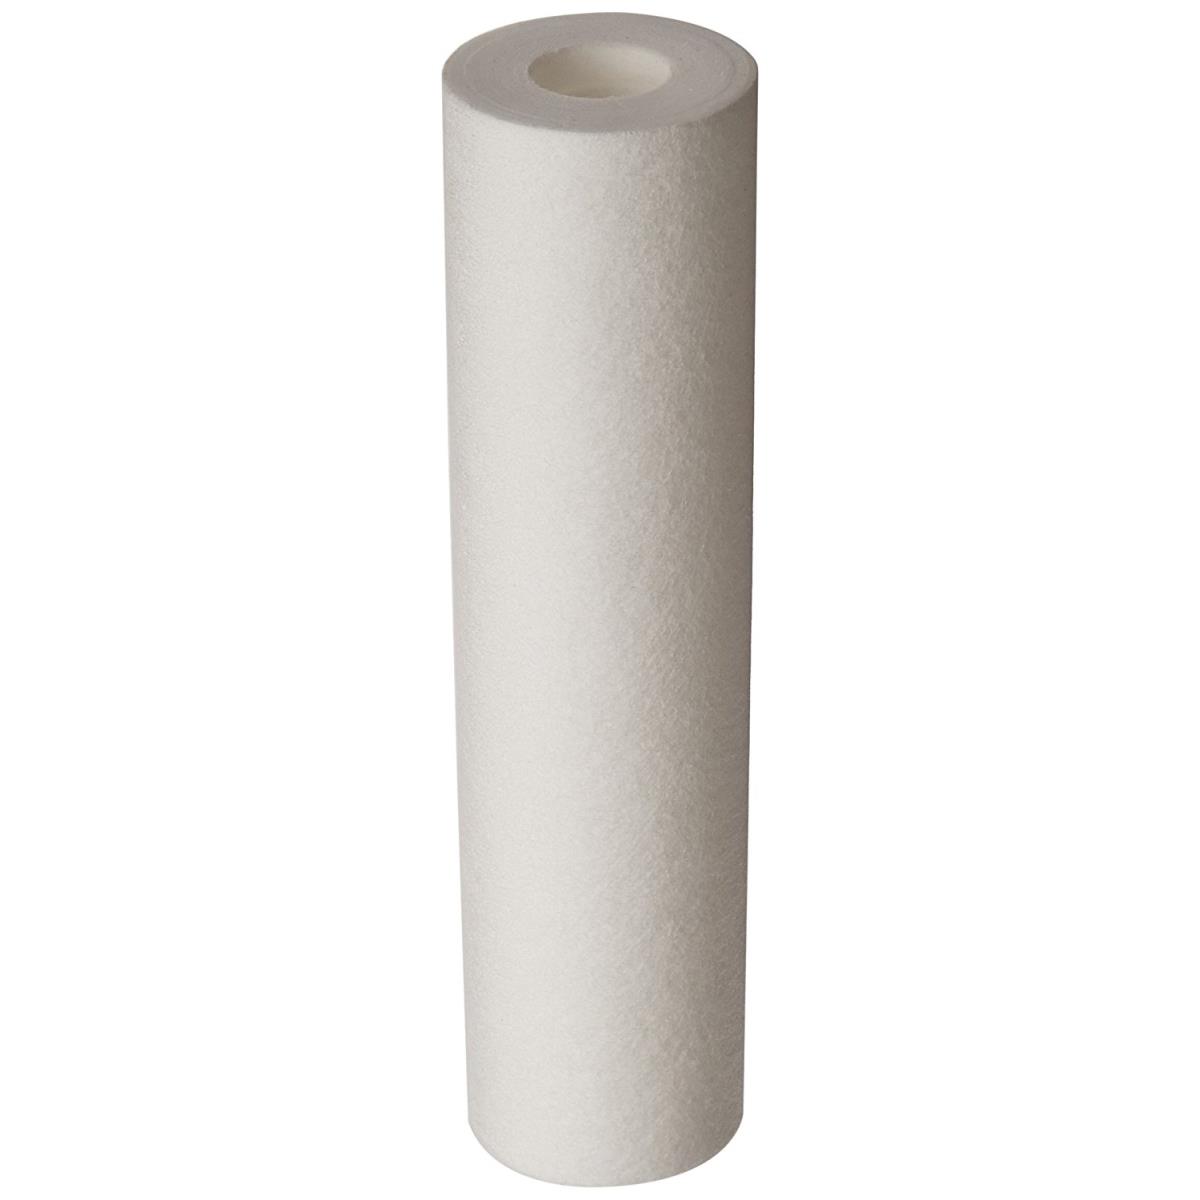 Pentek Whole House Replacement Sediment Filter Cartridge, 10 In.